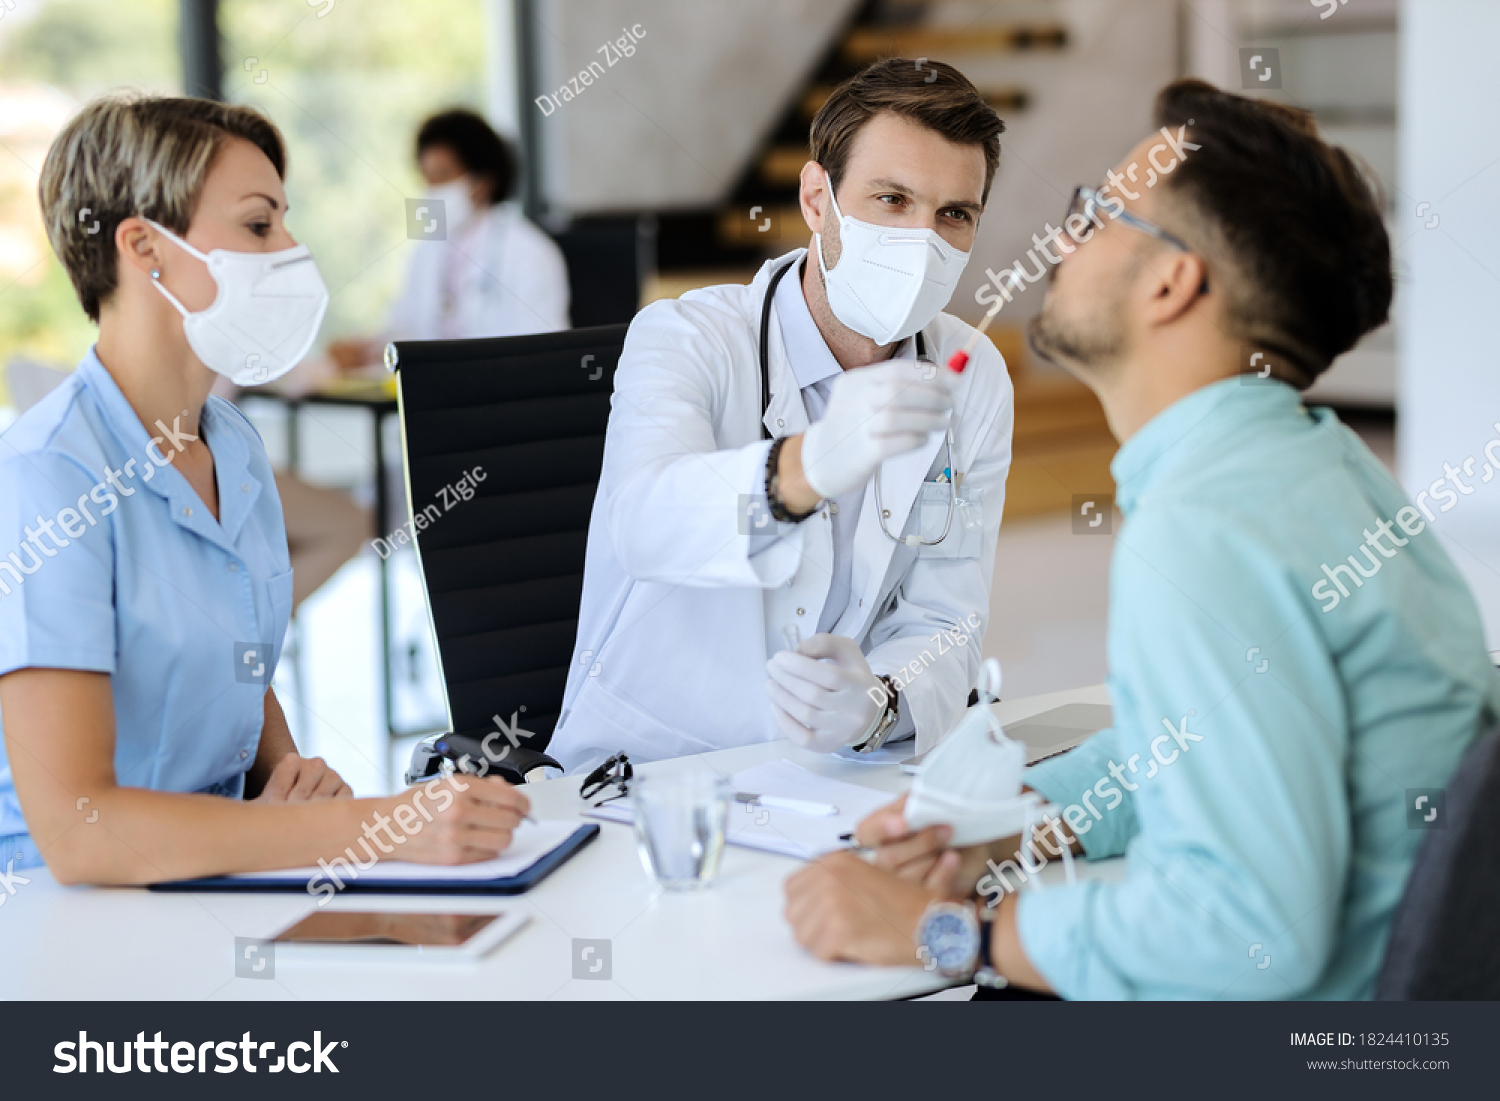 Doctor wearing protective face mask and using cotton swab while doing PCR test of a patient during coronavirus pandemic.  #1824410135